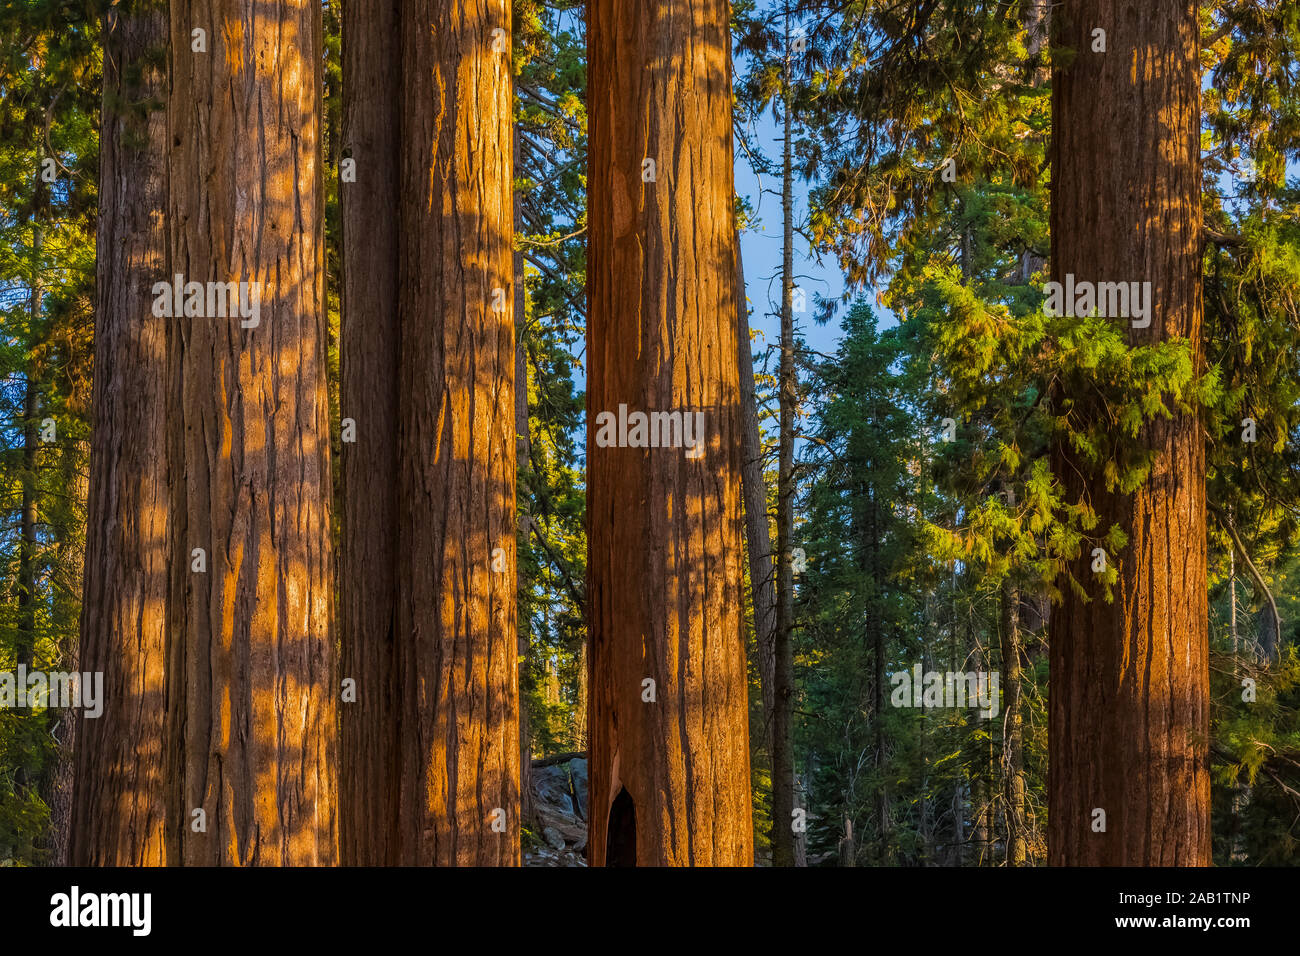 Awe-inspiring Giant Sequoia, Sequoiadendron giganteum, trees in General Grant Grove in Kings Canyon National Park, California, USA Stock Photo